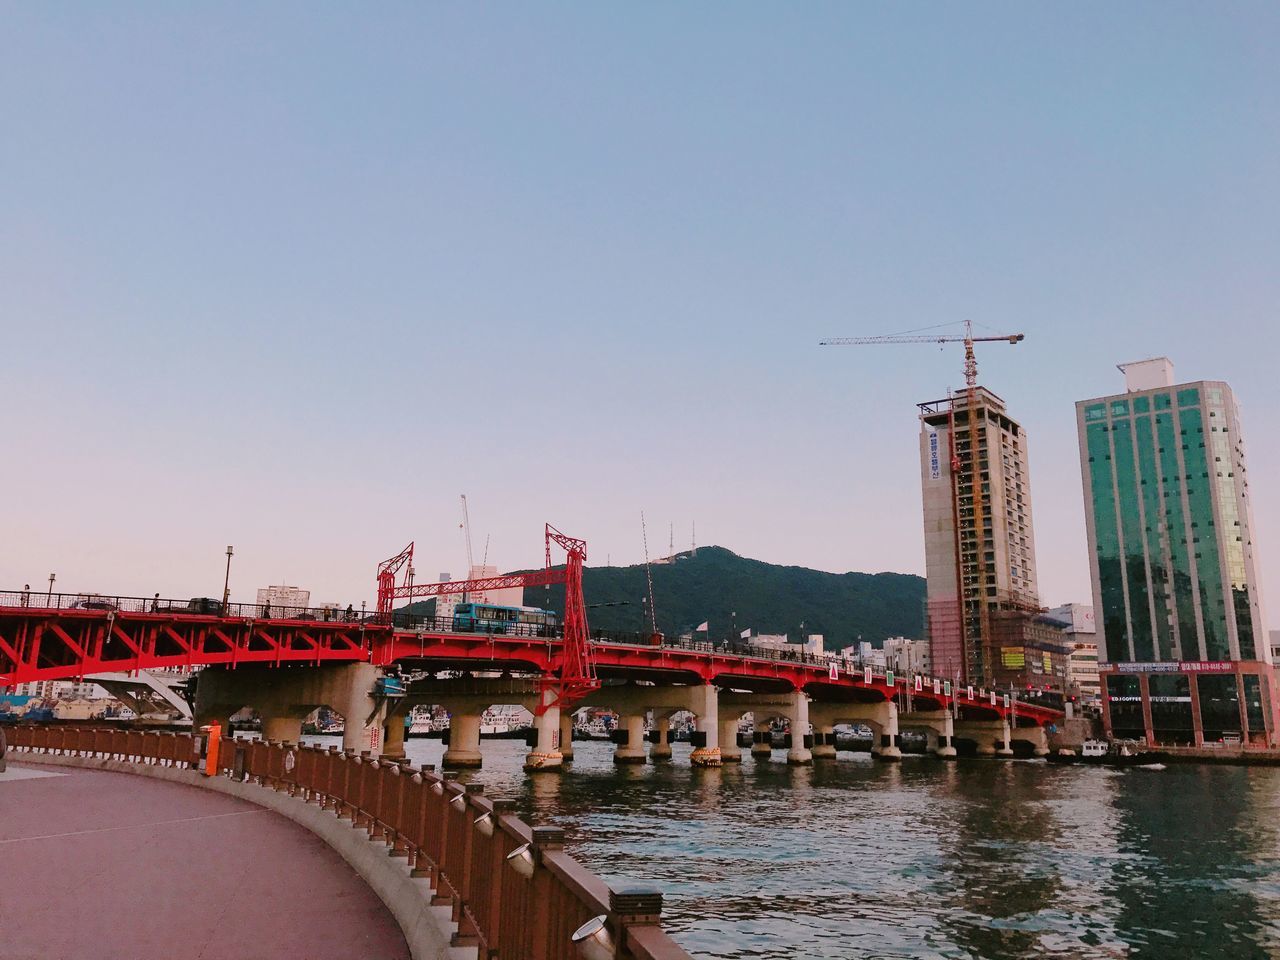 architecture, bridge - man made structure, built structure, connection, river, building exterior, city, transportation, bridge, waterfront, outdoors, clear sky, water, no people, day, sky